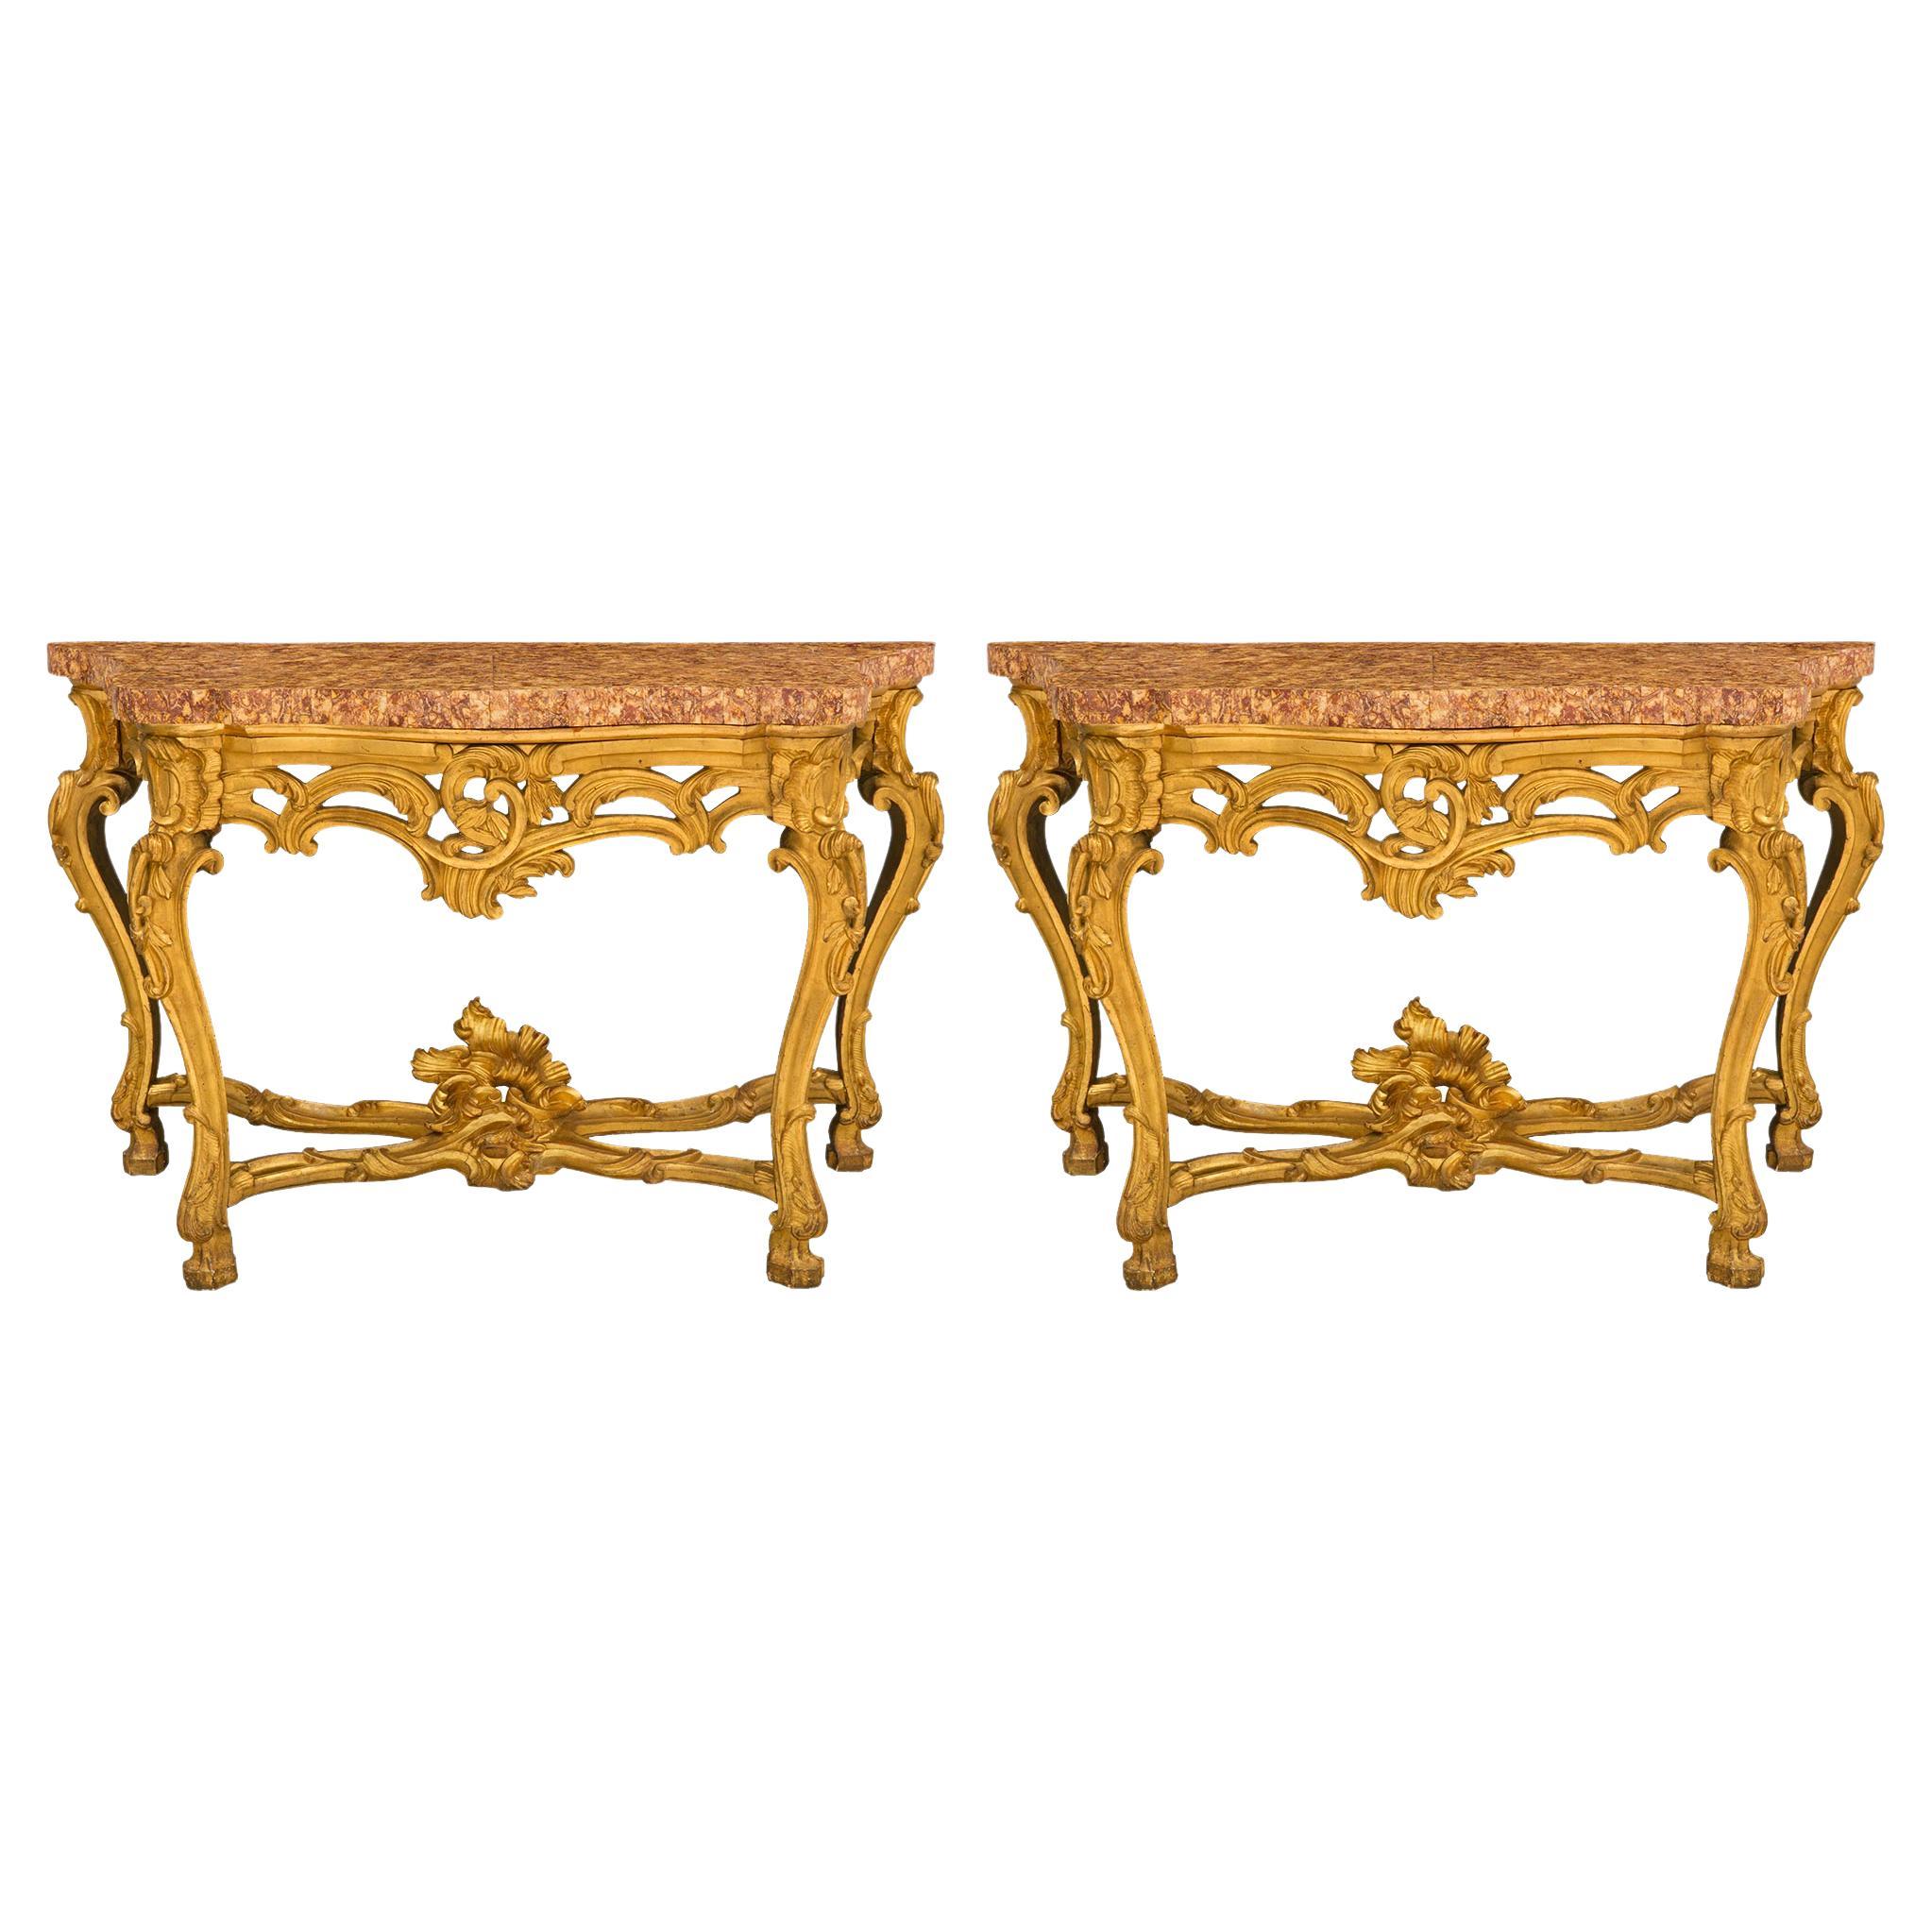 Pair of Italian Mid-18th Century Louis XV Period Giltwood Consoles For Sale